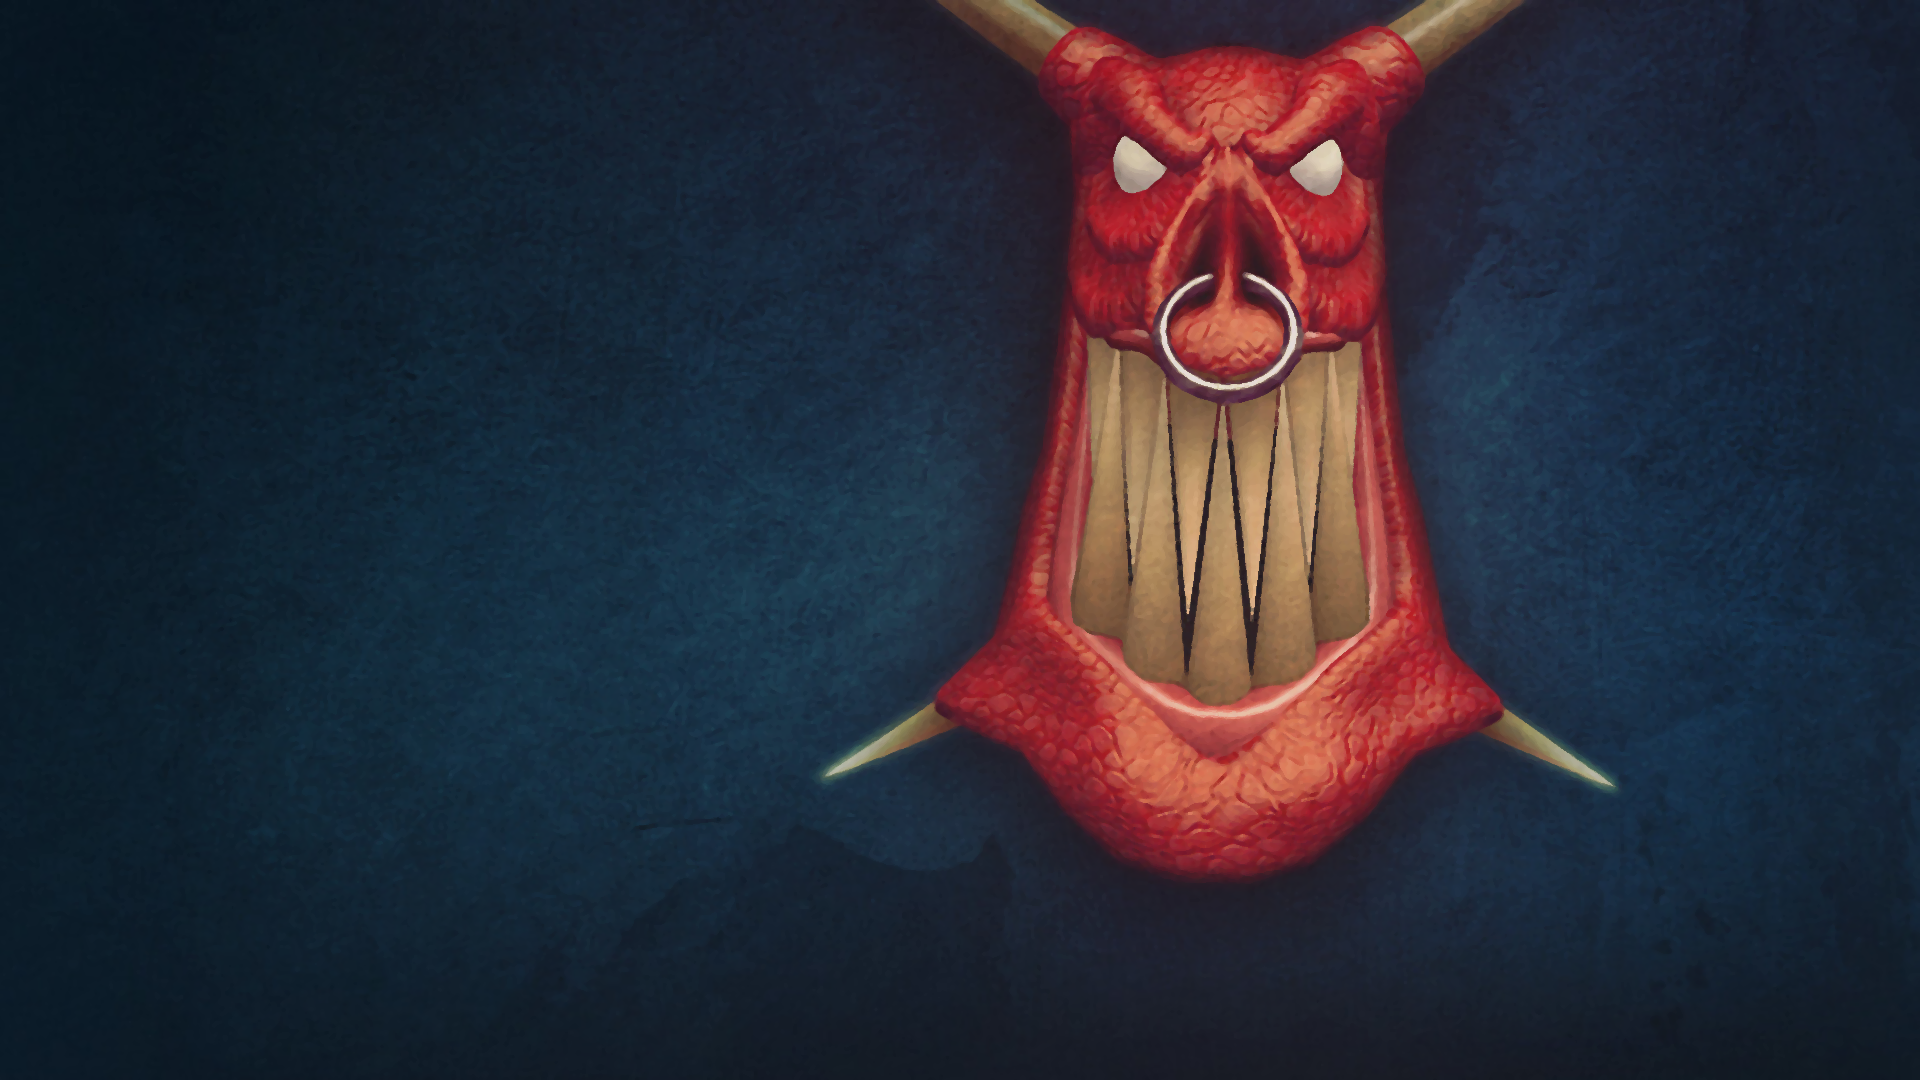 Dungeon Keeper: Gold Edition